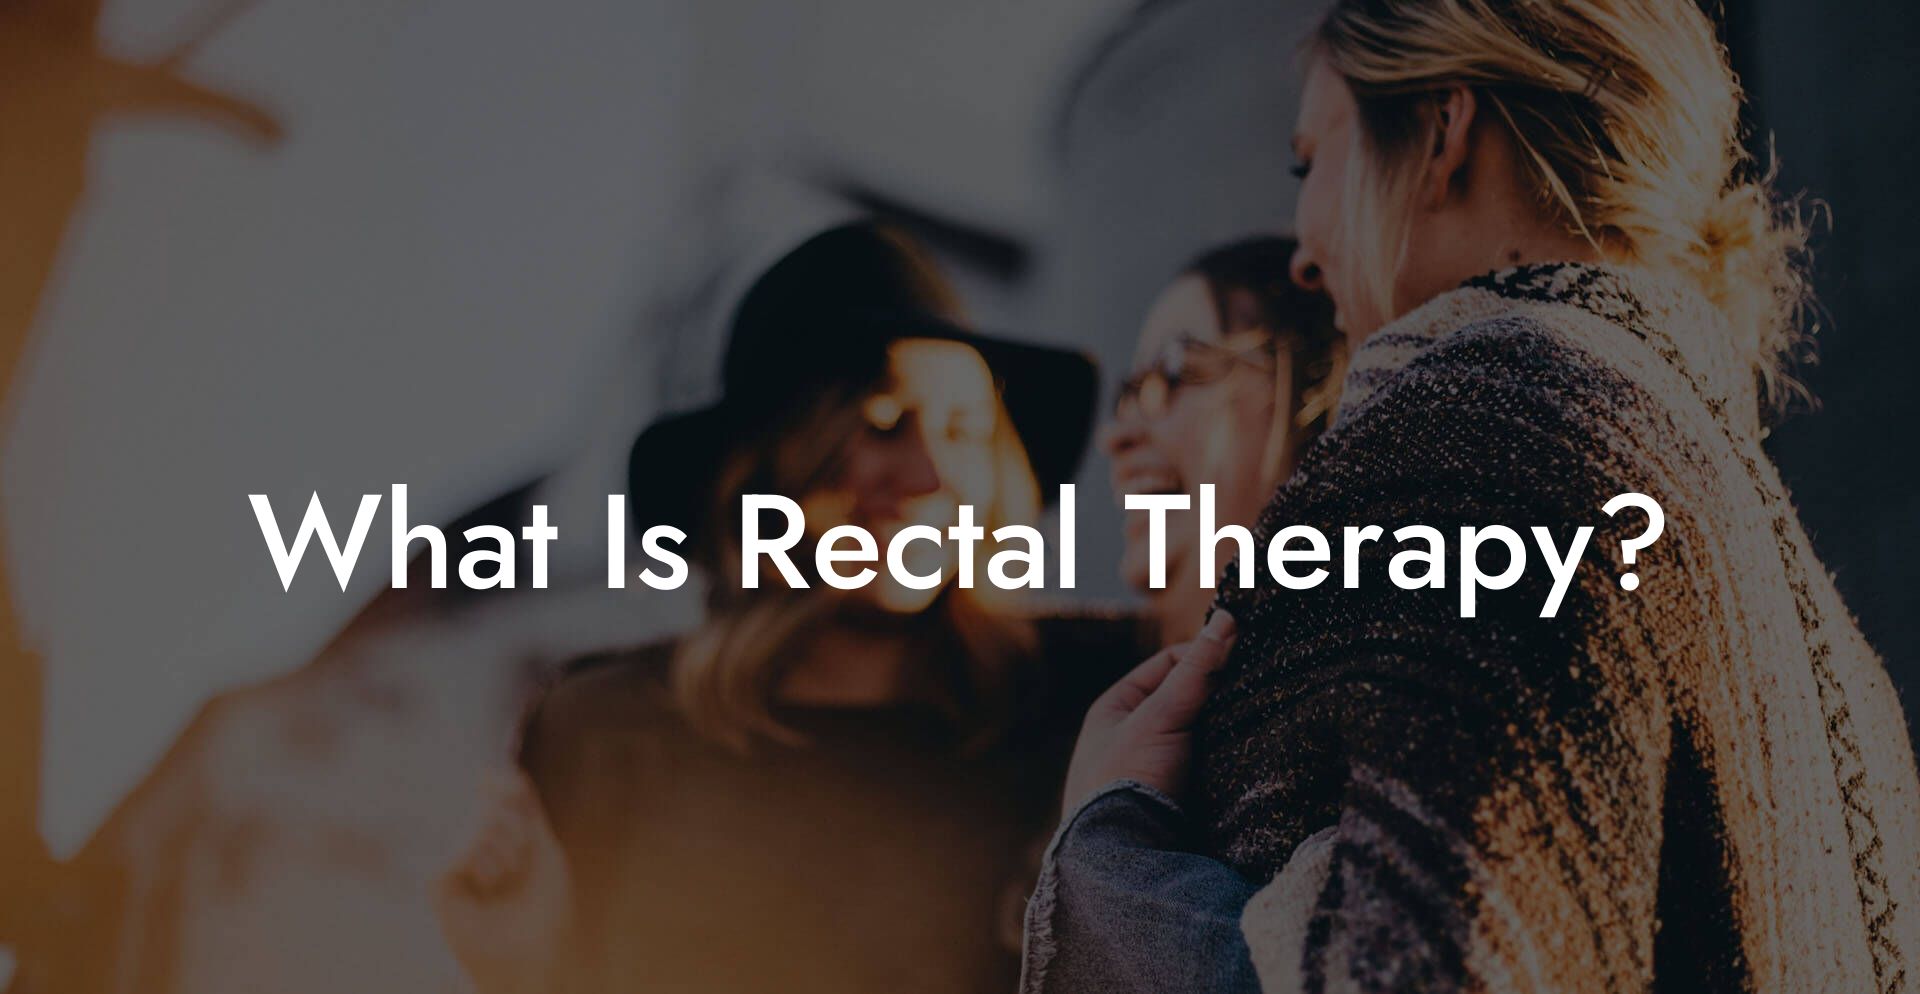 What Is Rectal Therapy?